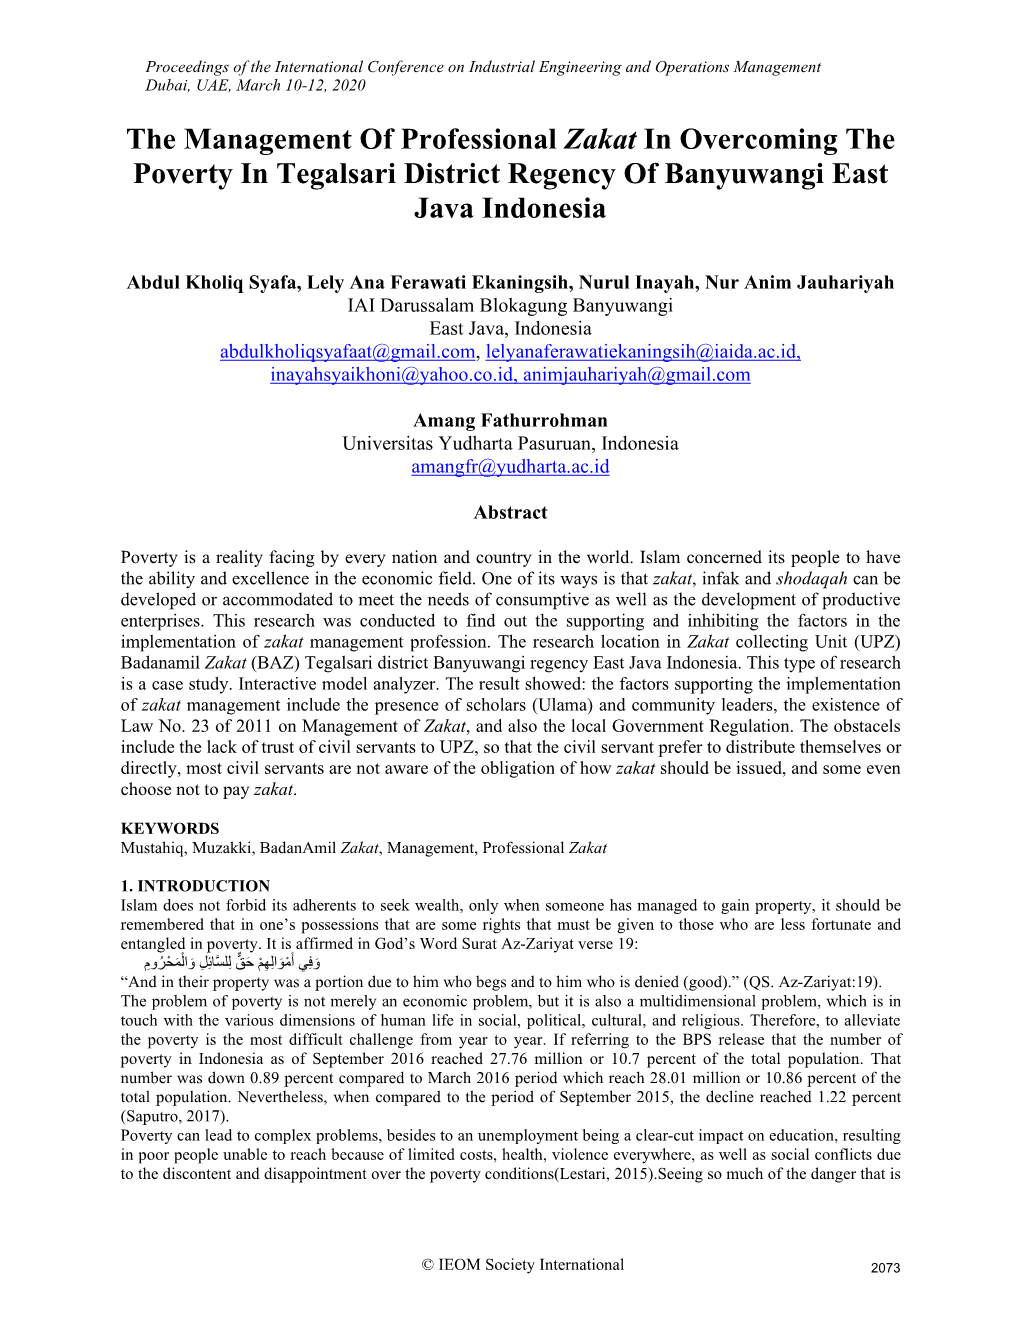 The Management of Professional Zakat in Overcoming the Poverty in Tegalsari District Regency of Banyuwangi East Java Indonesia